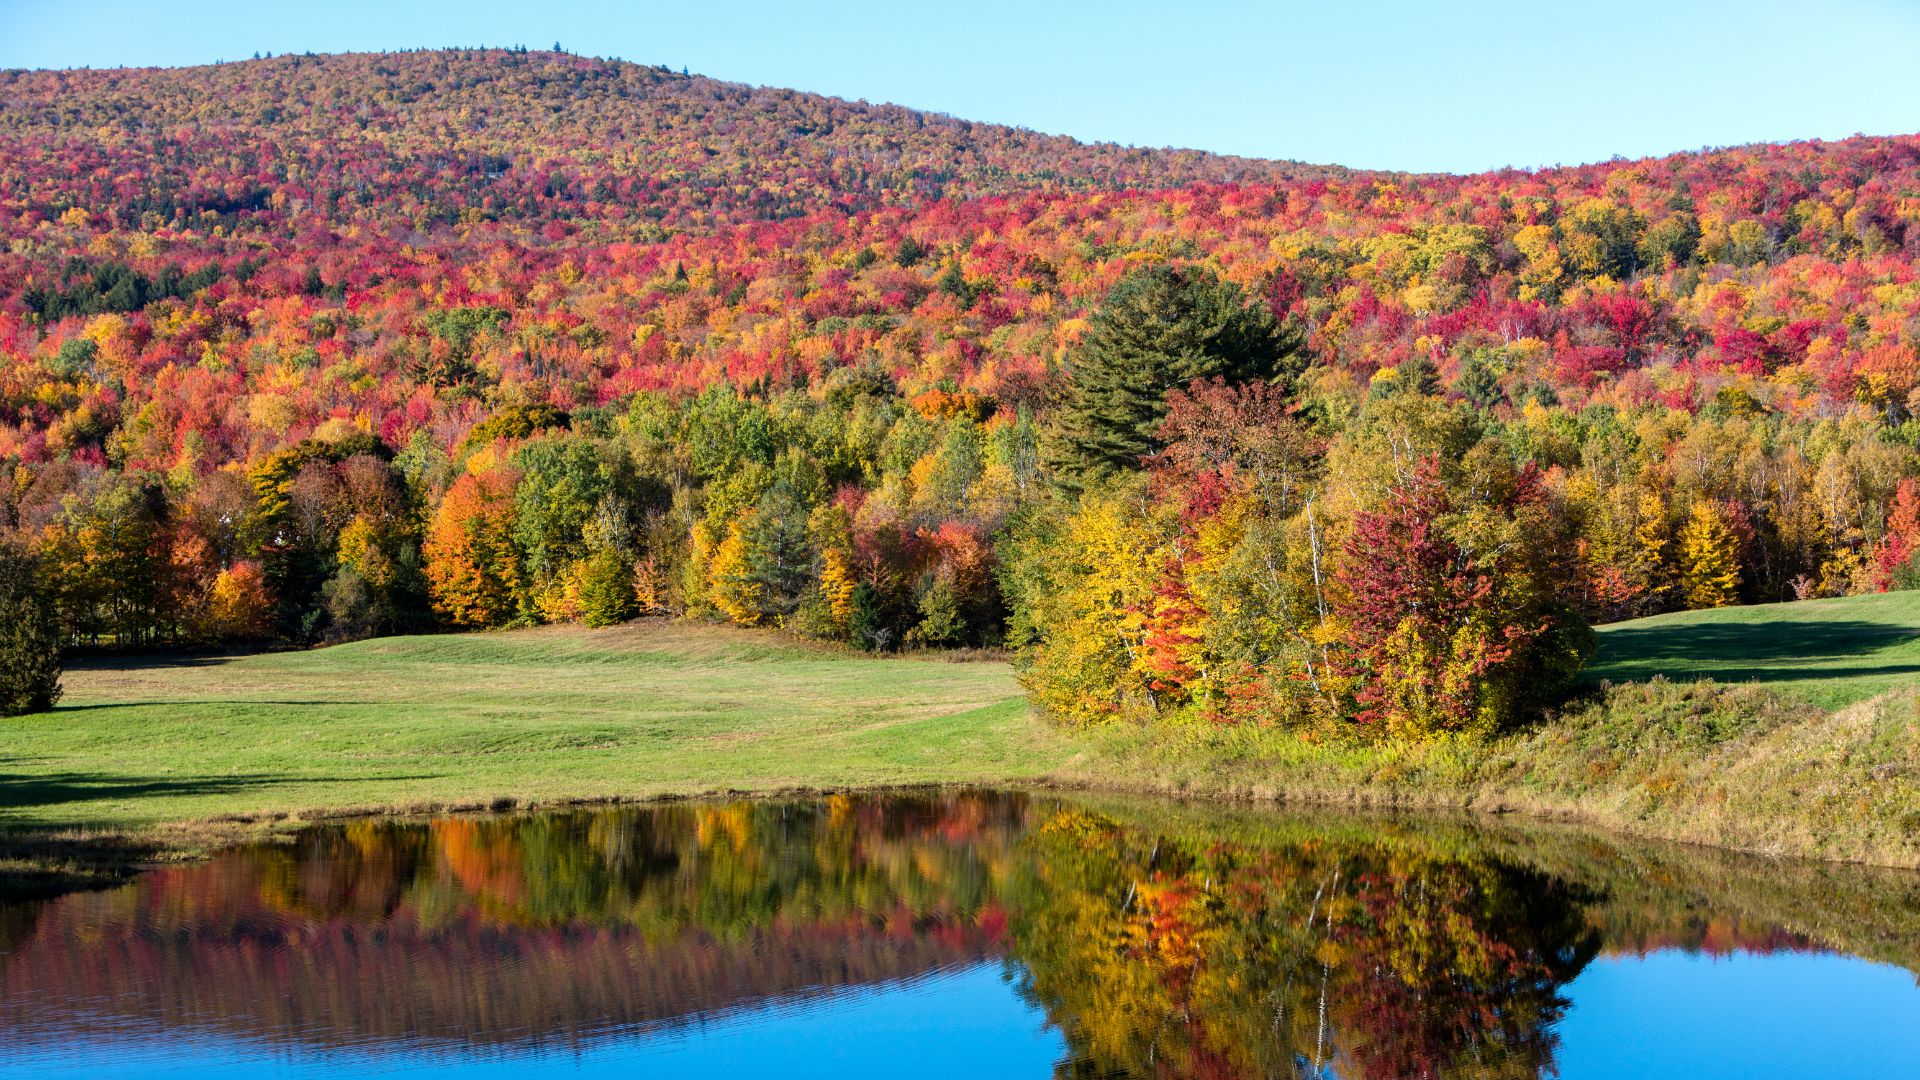 Stunning red and green foliage covers a hill with a pond in the foreground